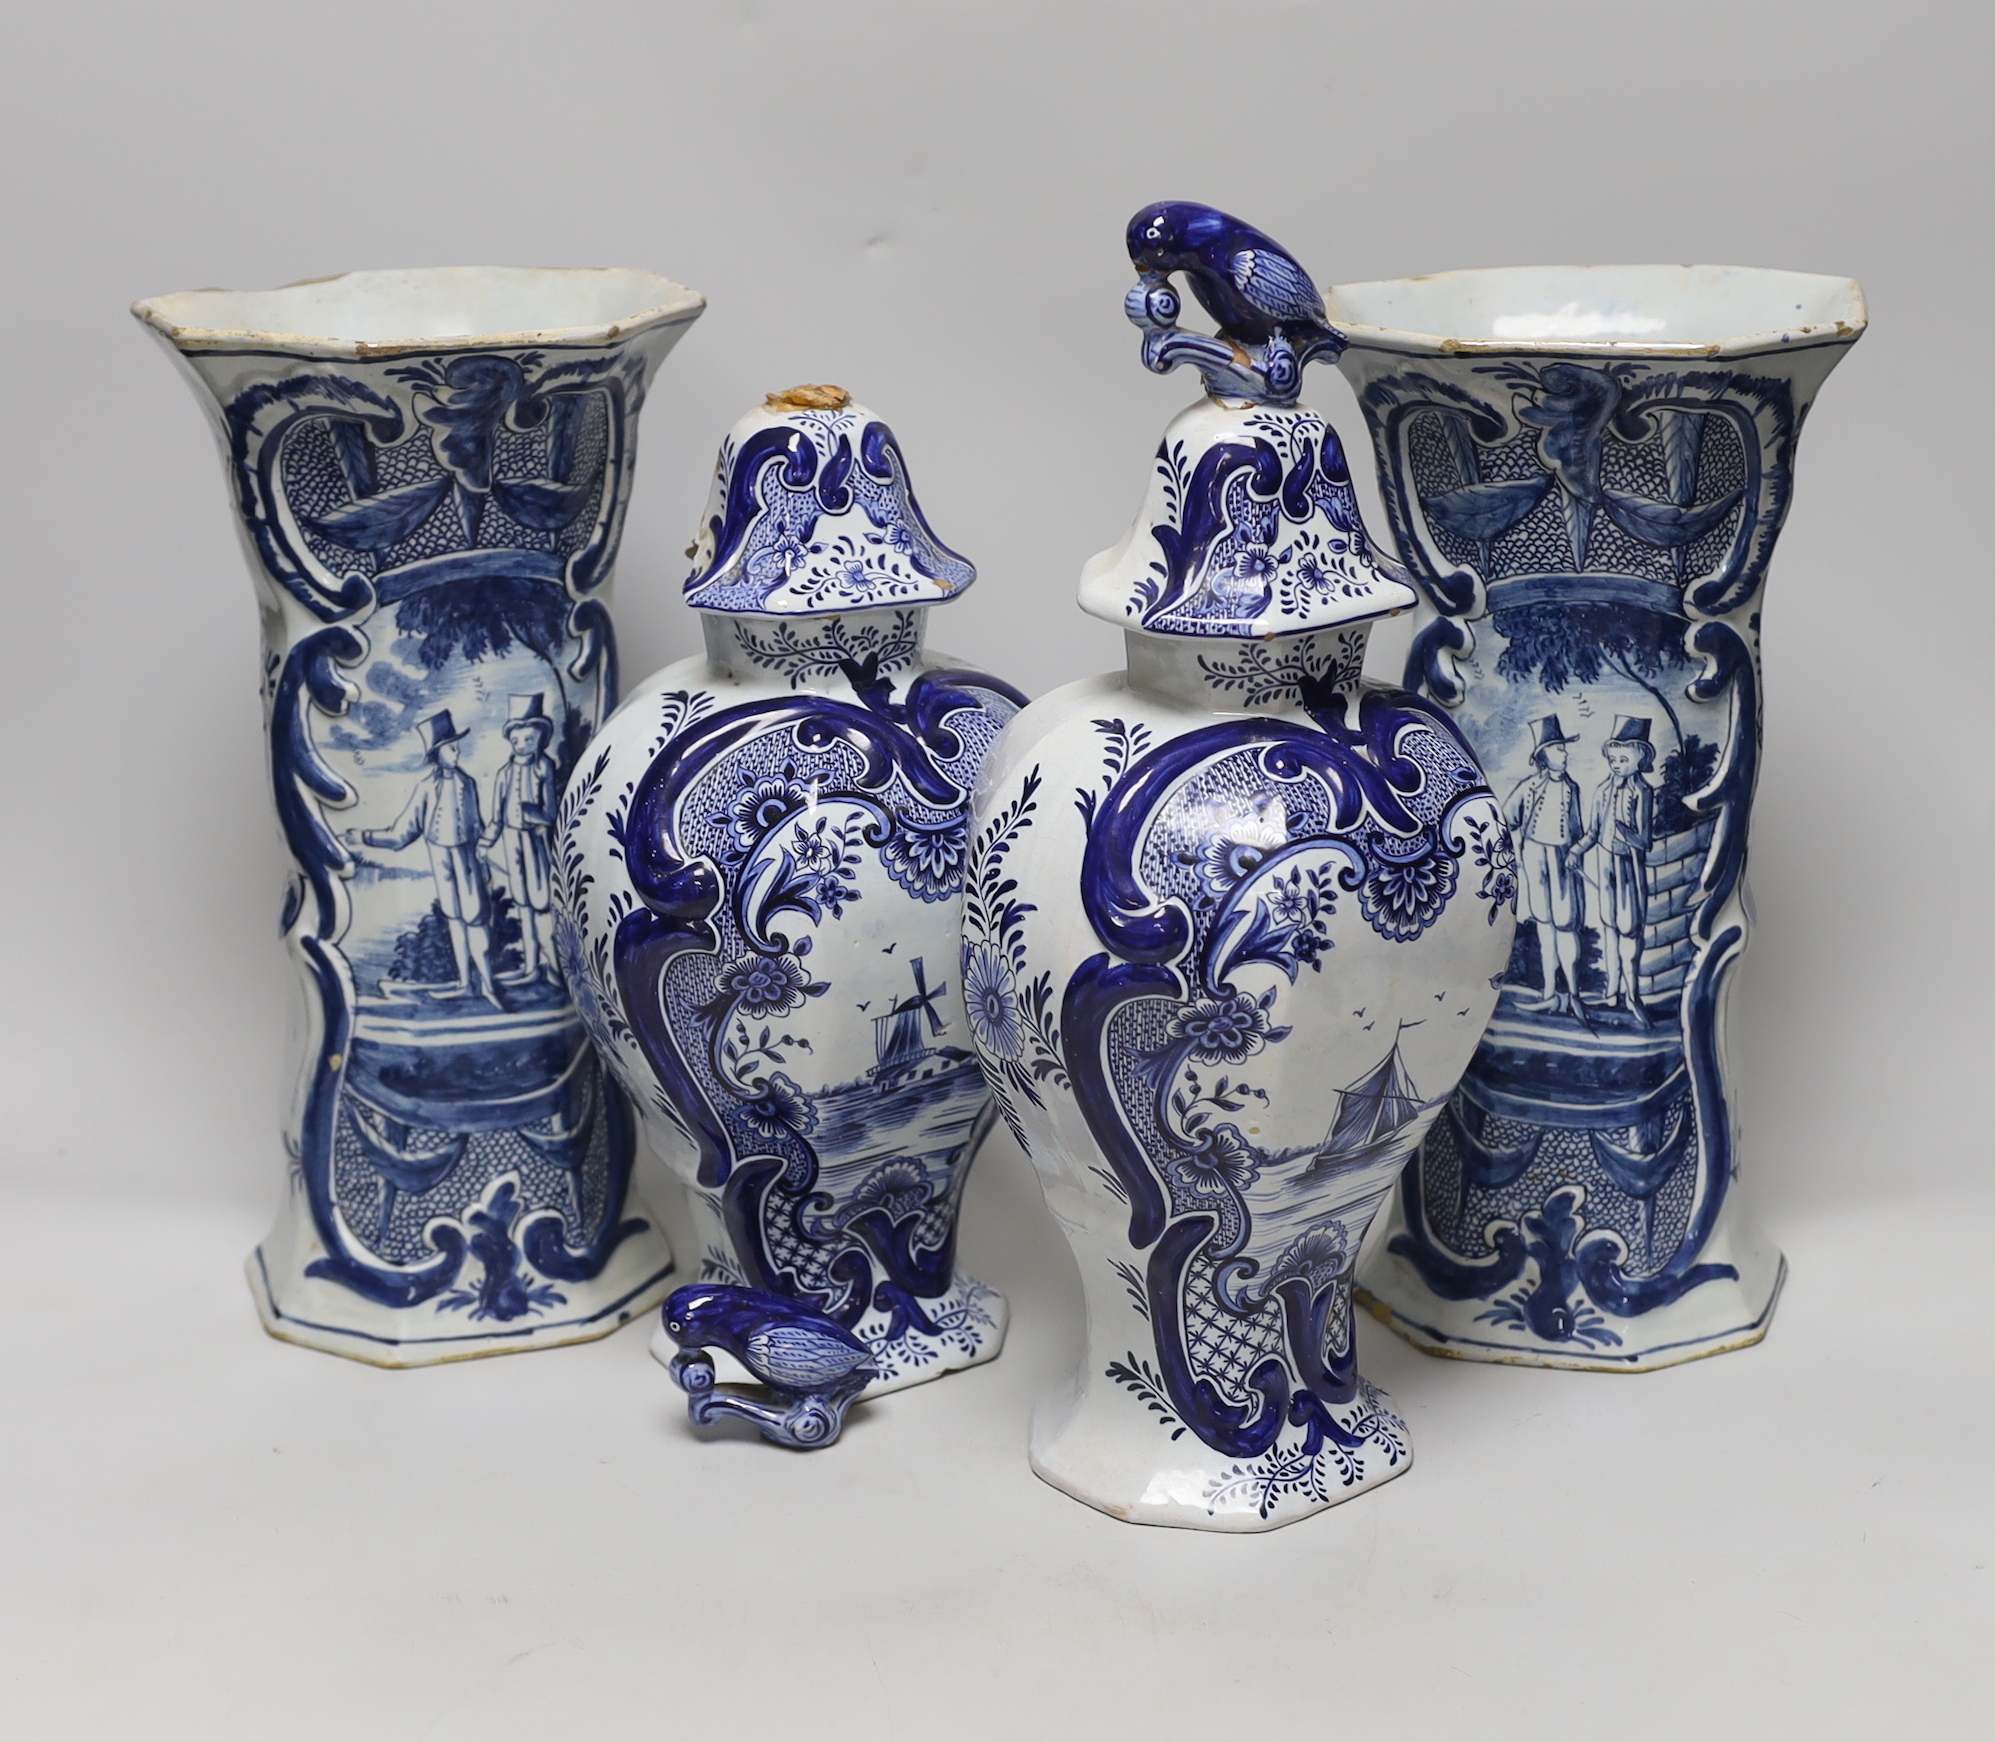 Two pairs of Delft vases, the tall hexagonal vases, 18th century, tallest 30cm